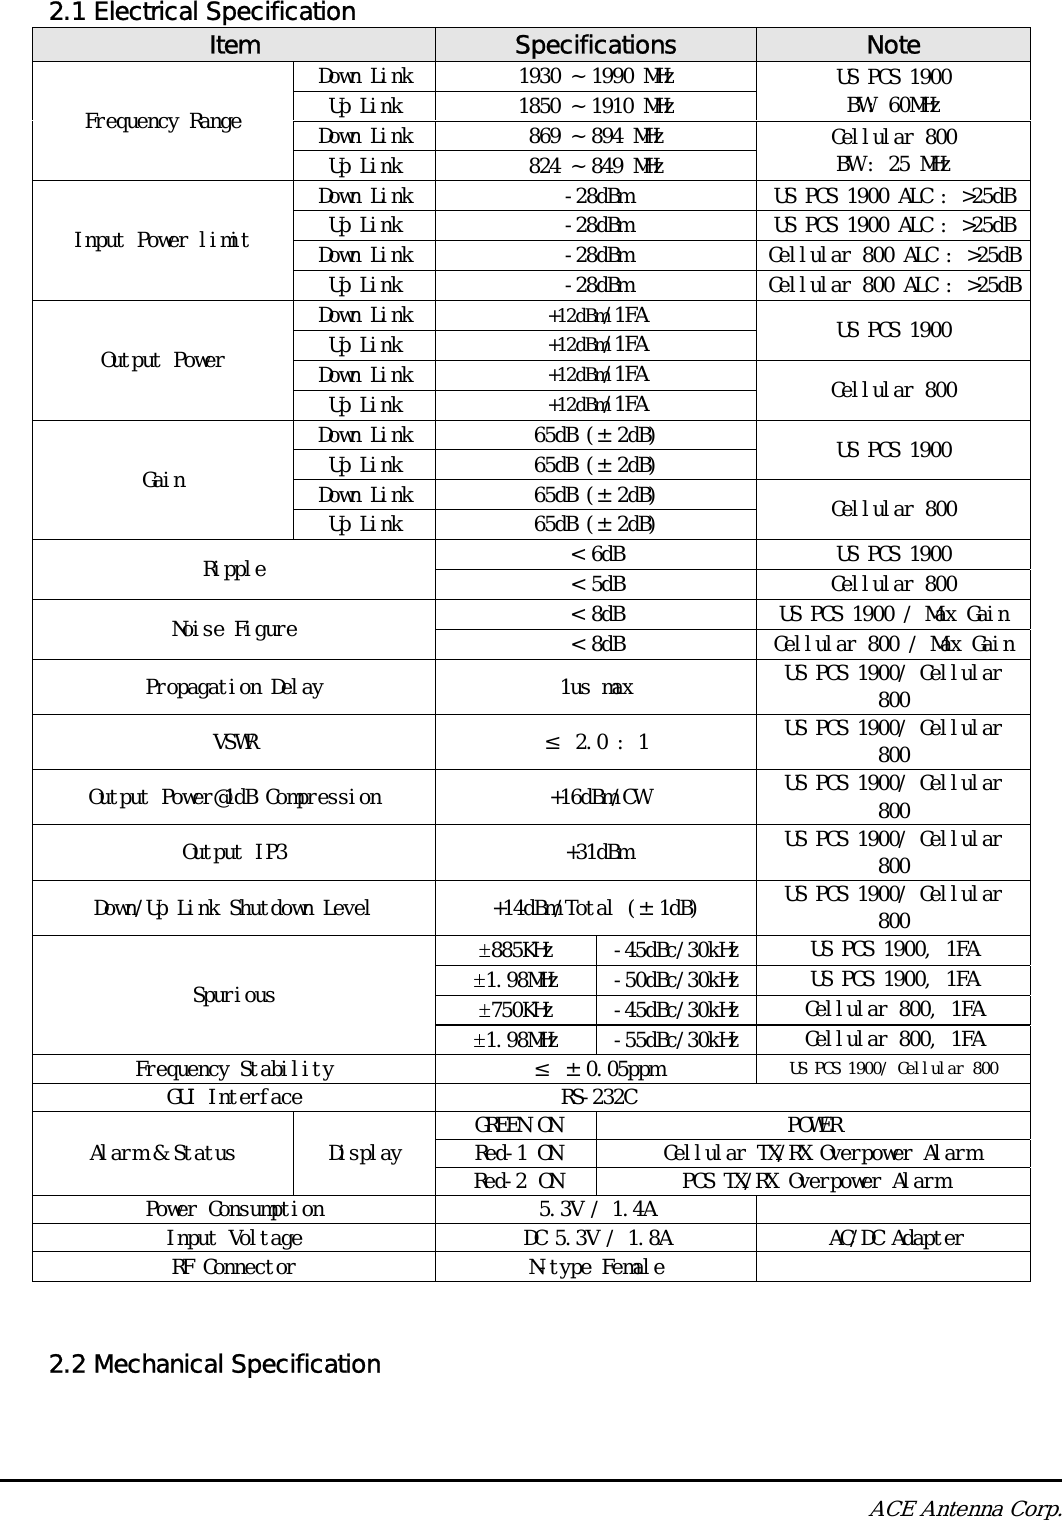  ACE Antenna Corp.  2.1 Electrical Specification Item  Specifications  Note Frequency Range Down Link  1930 ~ 1990 MHz  US PCS 1900  BW: 60MHz Up Link  1850 ~ 1910 MHz Down Link  869 ~ 894 MHz  Cellular 800 BW : 25 MHz Up Link  824 ~ 849 MHz Input Power limit Down Link  -28dBm  US PCS 1900 ALC : &gt;25dBUp Link  -28dBm  US PCS 1900 ALC : &gt;25dBDown Link  -28dBm  Cellular 800 ALC : &gt;25dBUp Link  -28dBm  Cellular 800 ALC : &gt;25dBOutput Power Down Link  +12dBm/1FA  US PCS 1900 Up Link  +12dBm/1FA Down Link  +12dBm/1FA  Cellular 800 Up Link  +12dBm/1FA Gain Down Link  65dB (±2dB)  US PCS 1900 Up Link  65dB (±2dB) Down Link  65dB (±2dB)  Cellular 800 Up Link  65dB (±2dB) Ripple  &lt; 6dB  US PCS 1900 &lt; 5dB  Cellular 800 Noise Figure  &lt; 8dB  US PCS 1900 / Max Gain &lt; 8dB  Cellular 800 / Max GainPropagation Delay  1us max  US PCS 1900/ Cellular 800 VSWR  ≤ 2.0 : 1  US PCS 1900/ Cellular 800 Output Power@1dB Compression  +16dBm/CW  US PCS 1900/ Cellular 800 Output IP3  +31dBm  US PCS 1900/ Cellular 800 Down/Up Link Shutdown Level  +14dBm/Total (±1dB)  US PCS 1900/ Cellular 800 Spurious ±885KHz  -45dBc/30kHz US PCS 1900, 1FA ±1.98MHz  -50dBc/30kHz US PCS 1900, 1FA ±750KHz  -45dBc/30kHz Cellular 800, 1FA ±1.98MHz  -55dBc/30kHz Cellular 800, 1FA Frequency Stability  ≤ ±0.05ppm  US PCS 1900/ Cellular 800 GUI Interface  RS-232C Alarm &amp; Status  Display  GREEN ON  POWER Red-1 ON  Cellular TX/RX Overpower Alarm Red-2 ON  PCS TX/RX Overpower Alarm Power Consumption  5.3V / 1.4A   Input Voltage  DC 5.3V / 1.8A  AC/DC Adapter  RF Connector  N-type Female     2.2 Mechanical Specification  